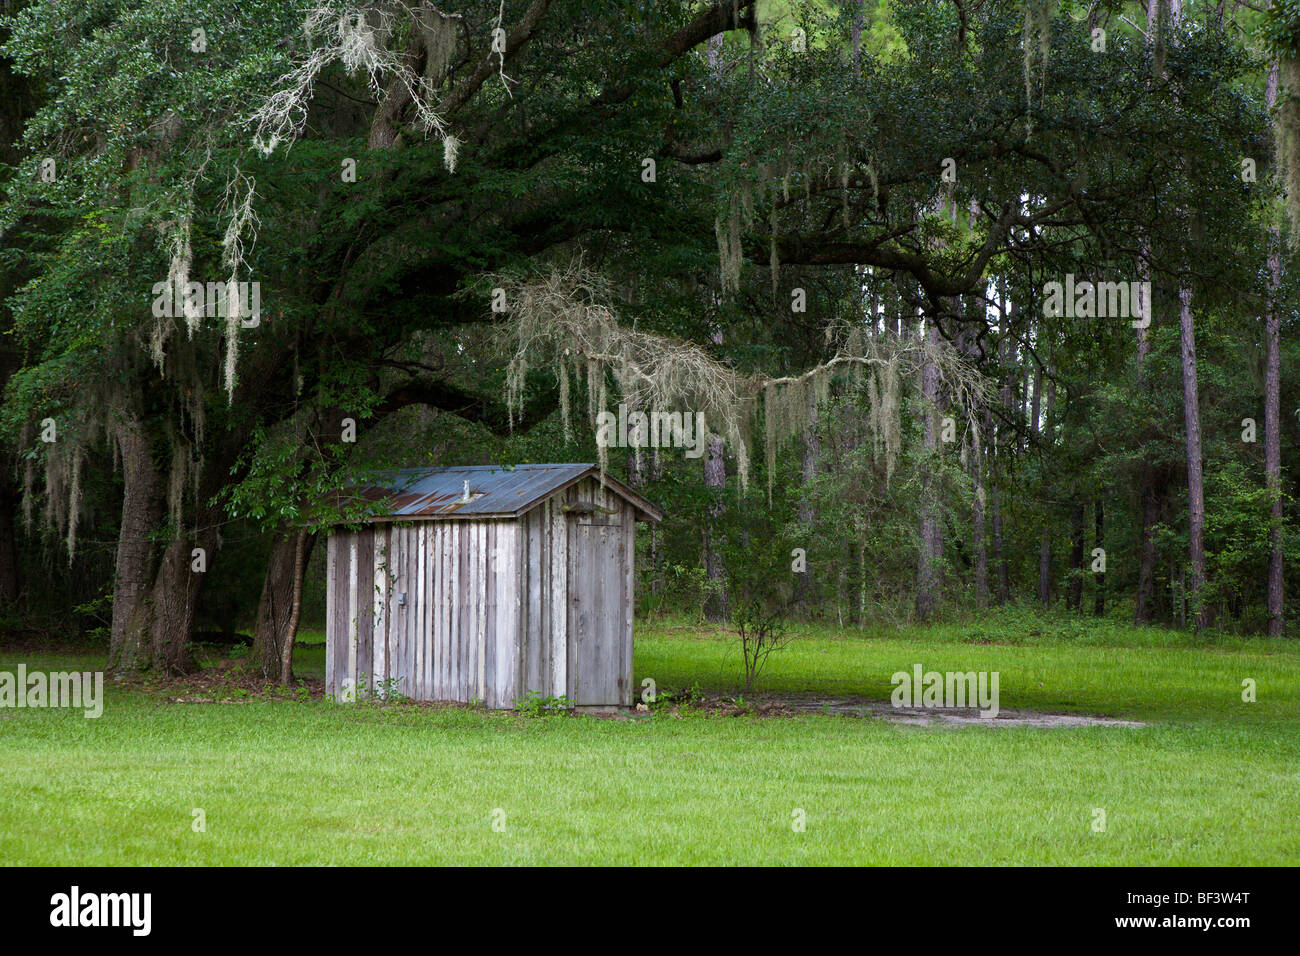 Friendship Florida - July 2008 - Old wooden shed with tin roof under big live oak tree with Spanish moss Stock Photo